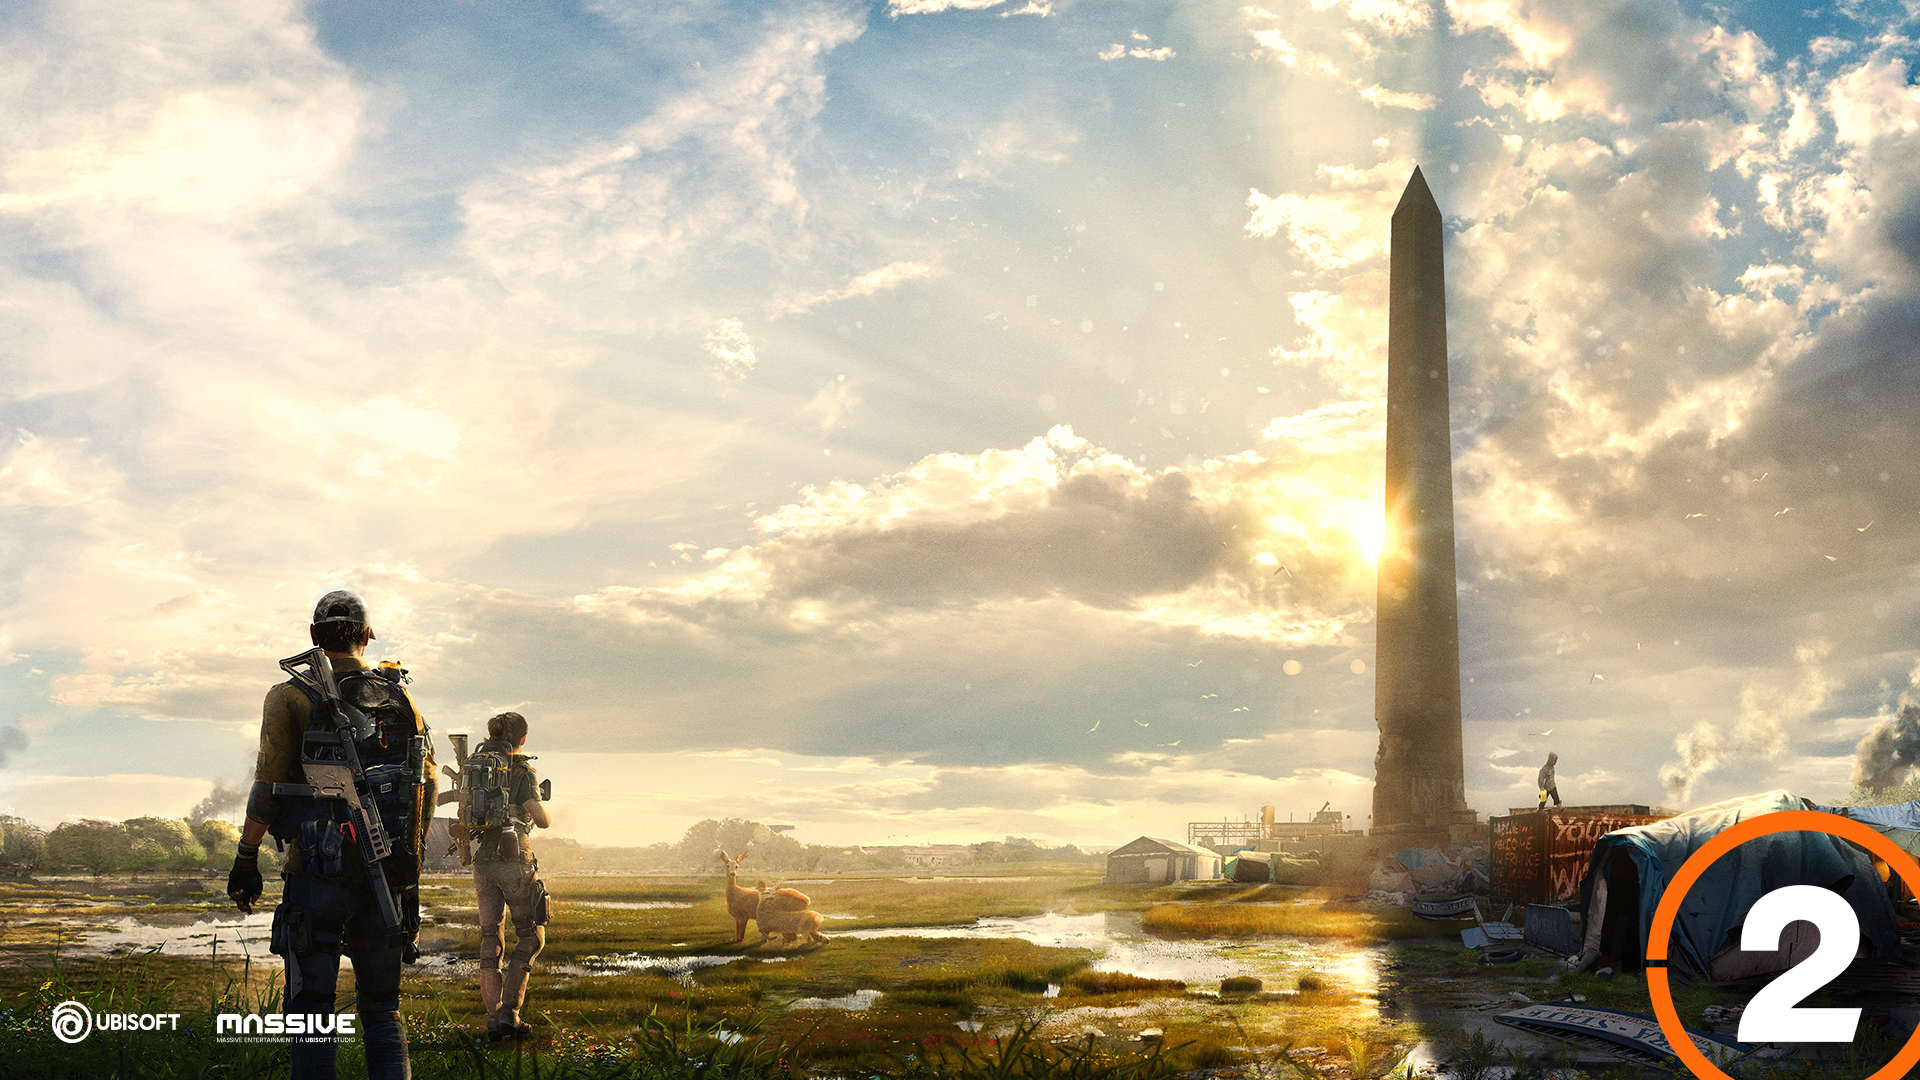 General 1920x1080 Tom Clancy's The Division 2 Ubisoft video games concept art Tom Clancy's The Division